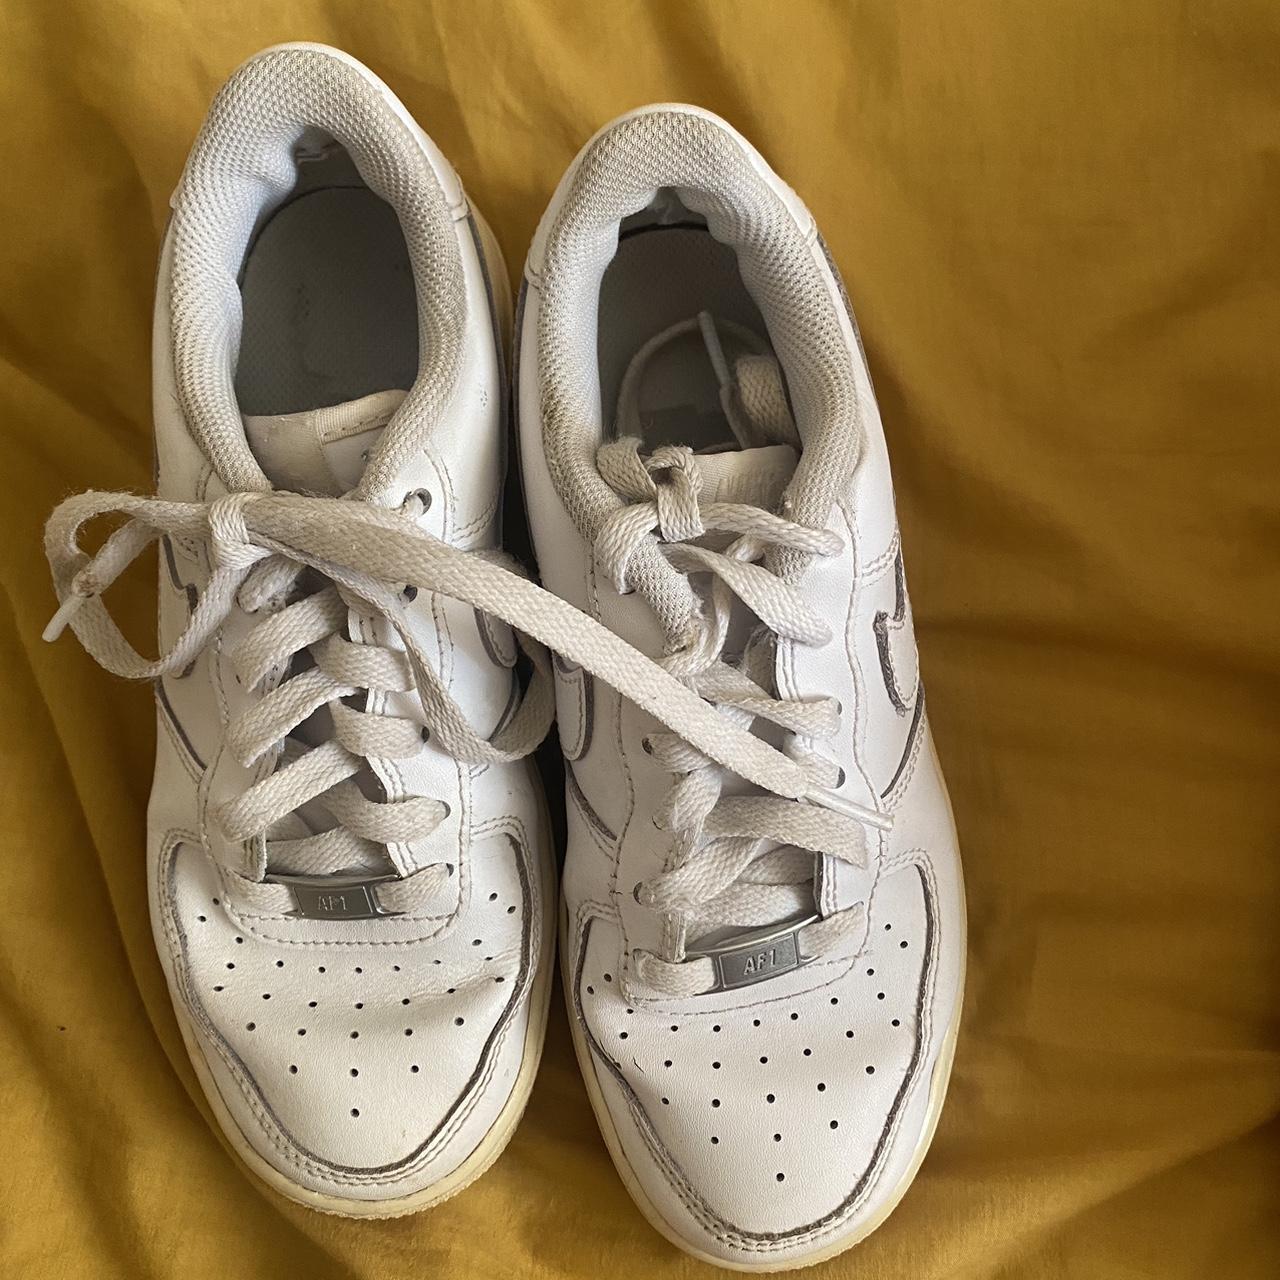 Really good condition air force 1s #airforce1 #nike... - Depop